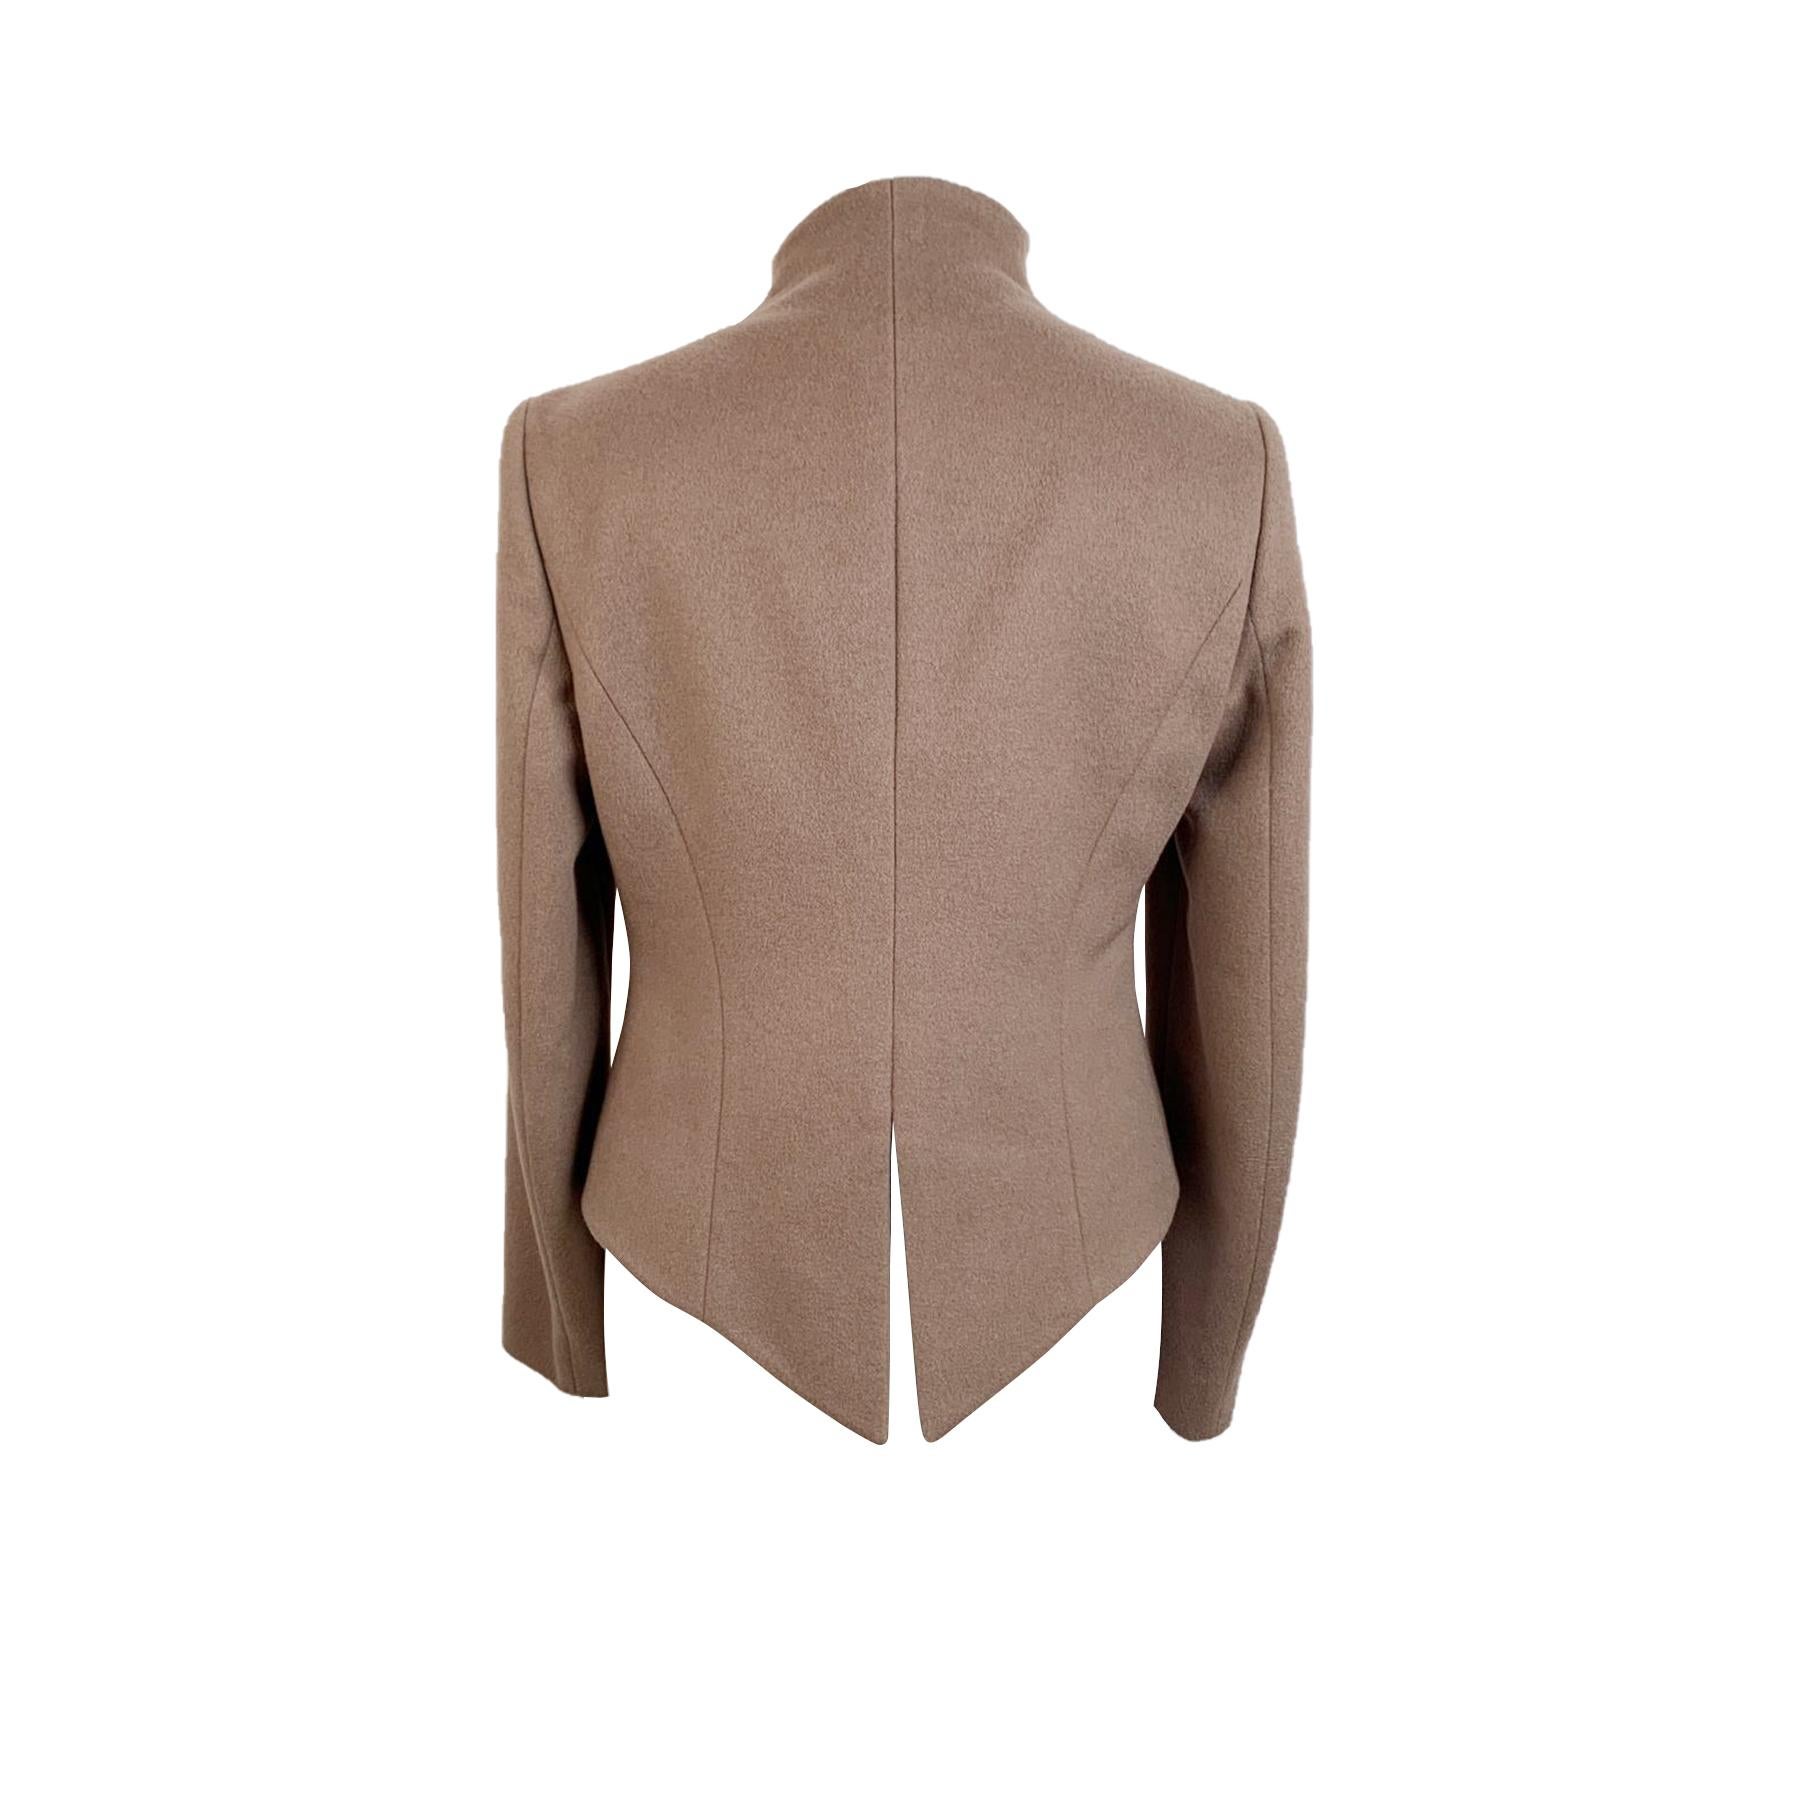 Emporio Armani beige cashmere jacket. Hook & Eye closure. Stand-up collar. 2 pockets on the waist. Rear slit. Lined. Size: 42 IT (The size shown for this item is the size indicated by the designer on the label). It should correspond to a SMALL